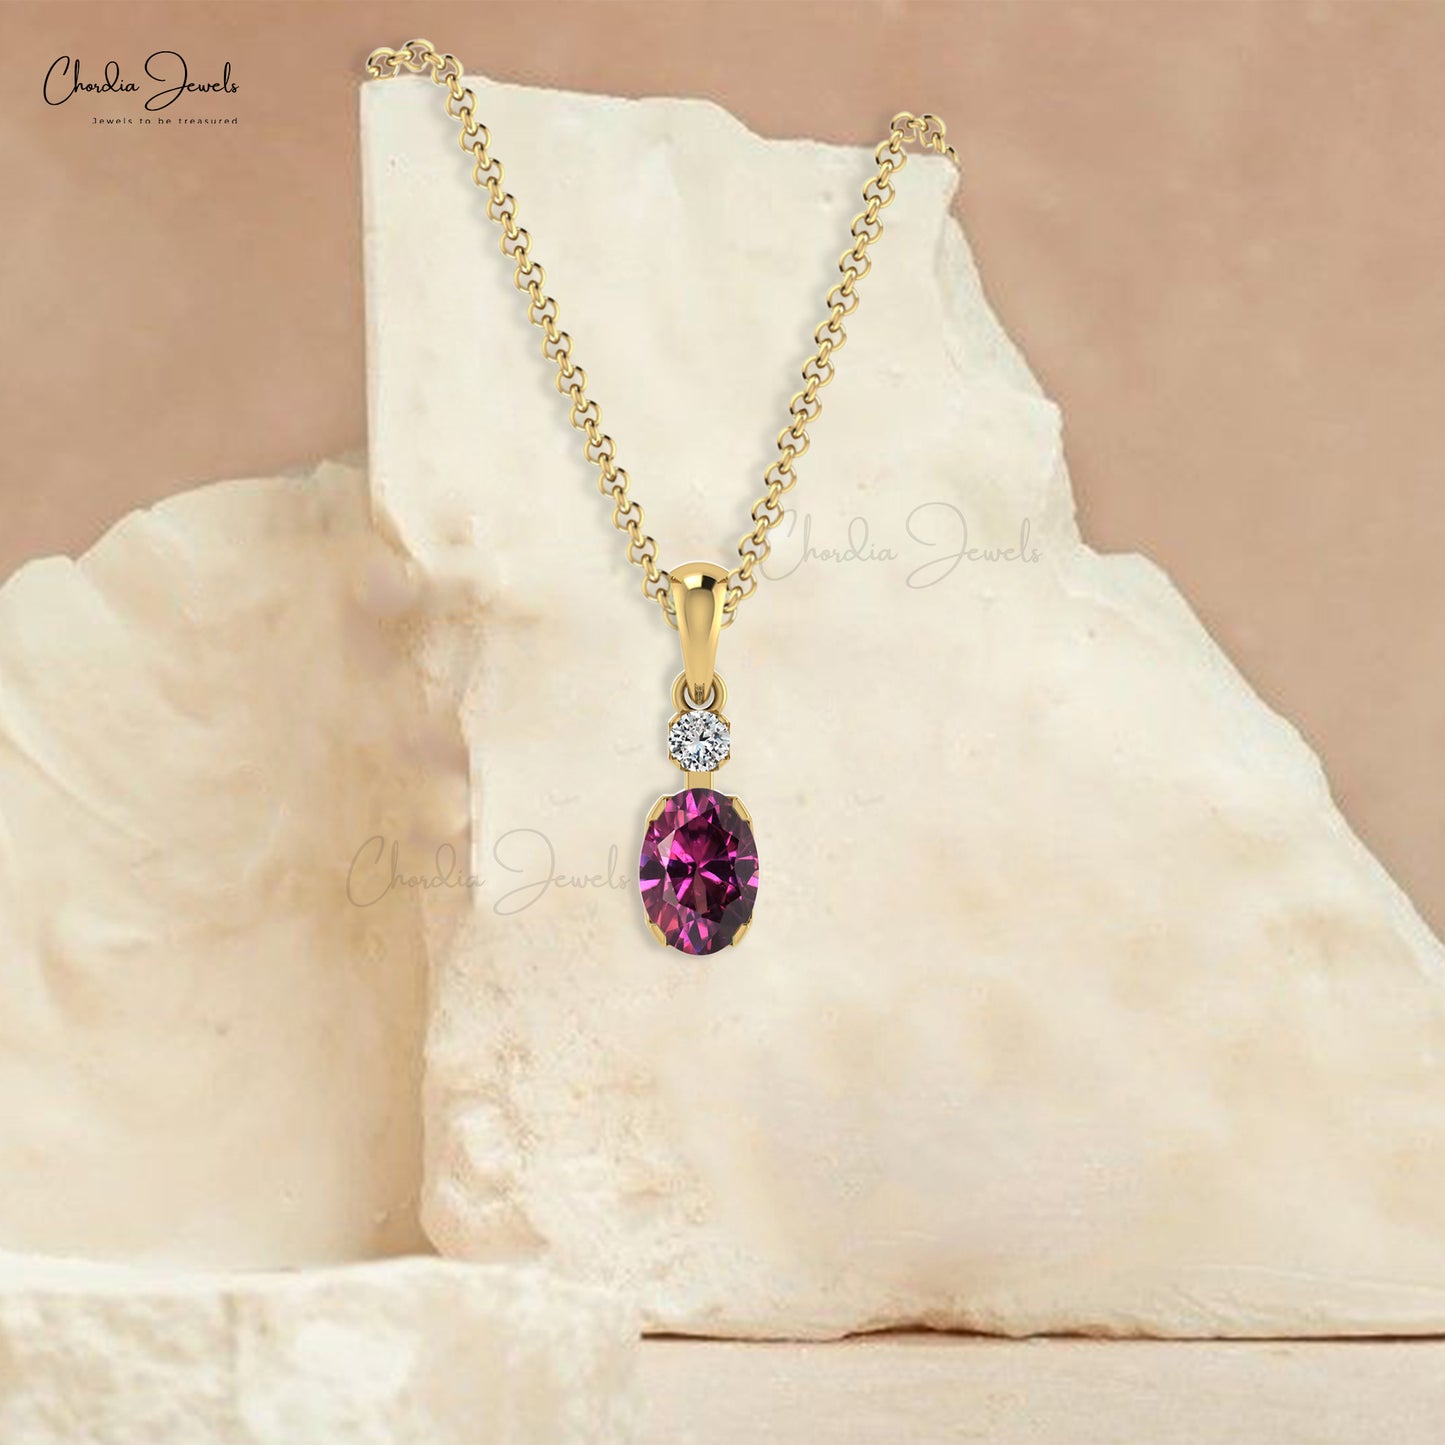 Pre Owned 18ct White Gold Diamond Amethyst Garnet and Citrine Pendant and  Chain ZP388 / pt miles jewellers